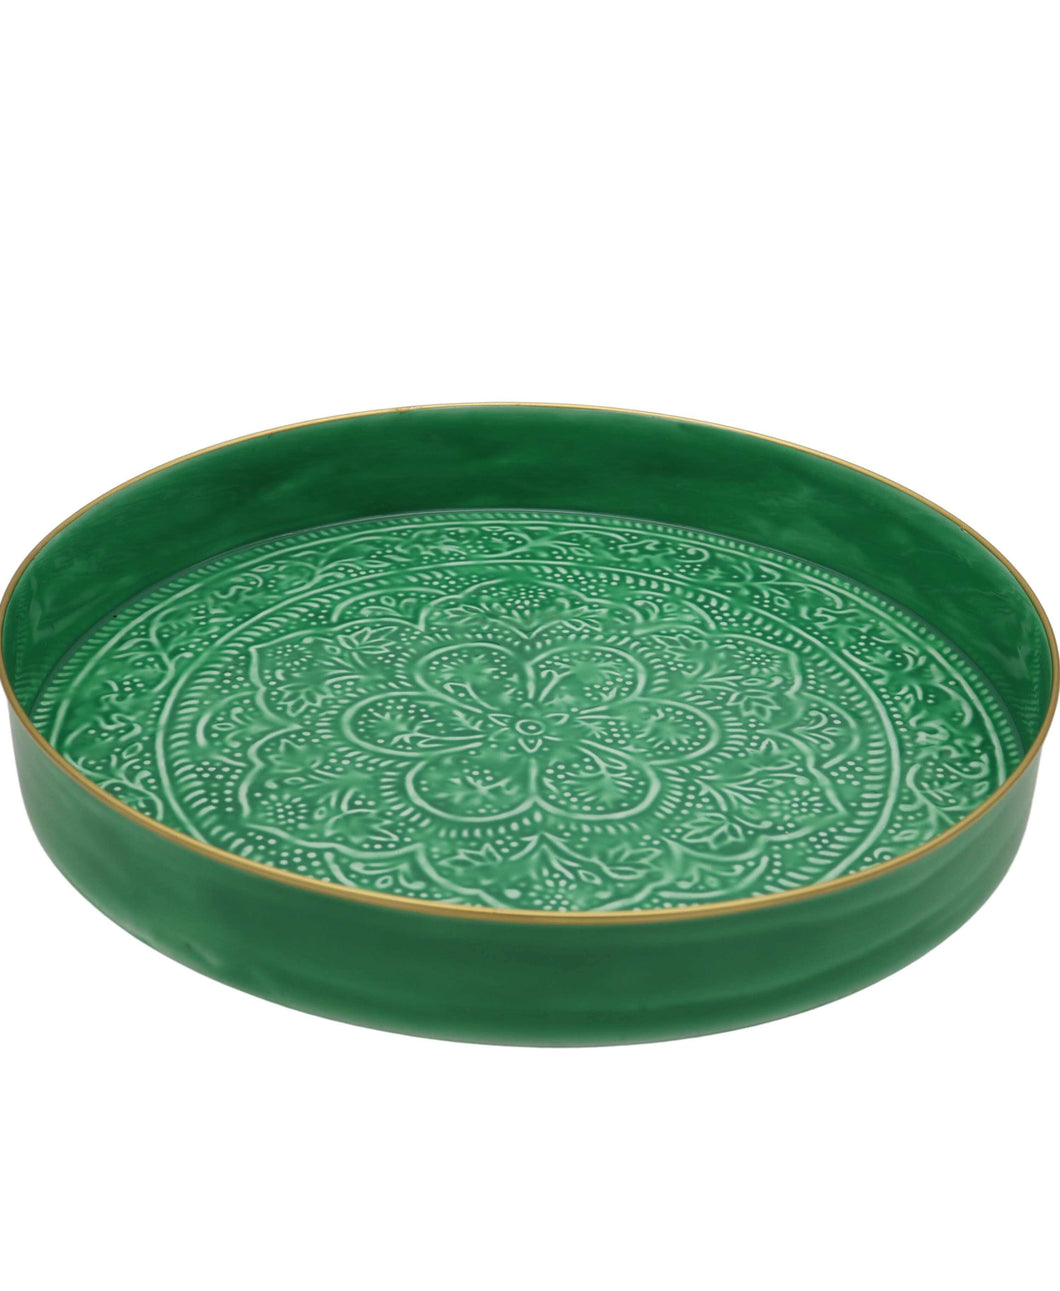 Large Green Tray